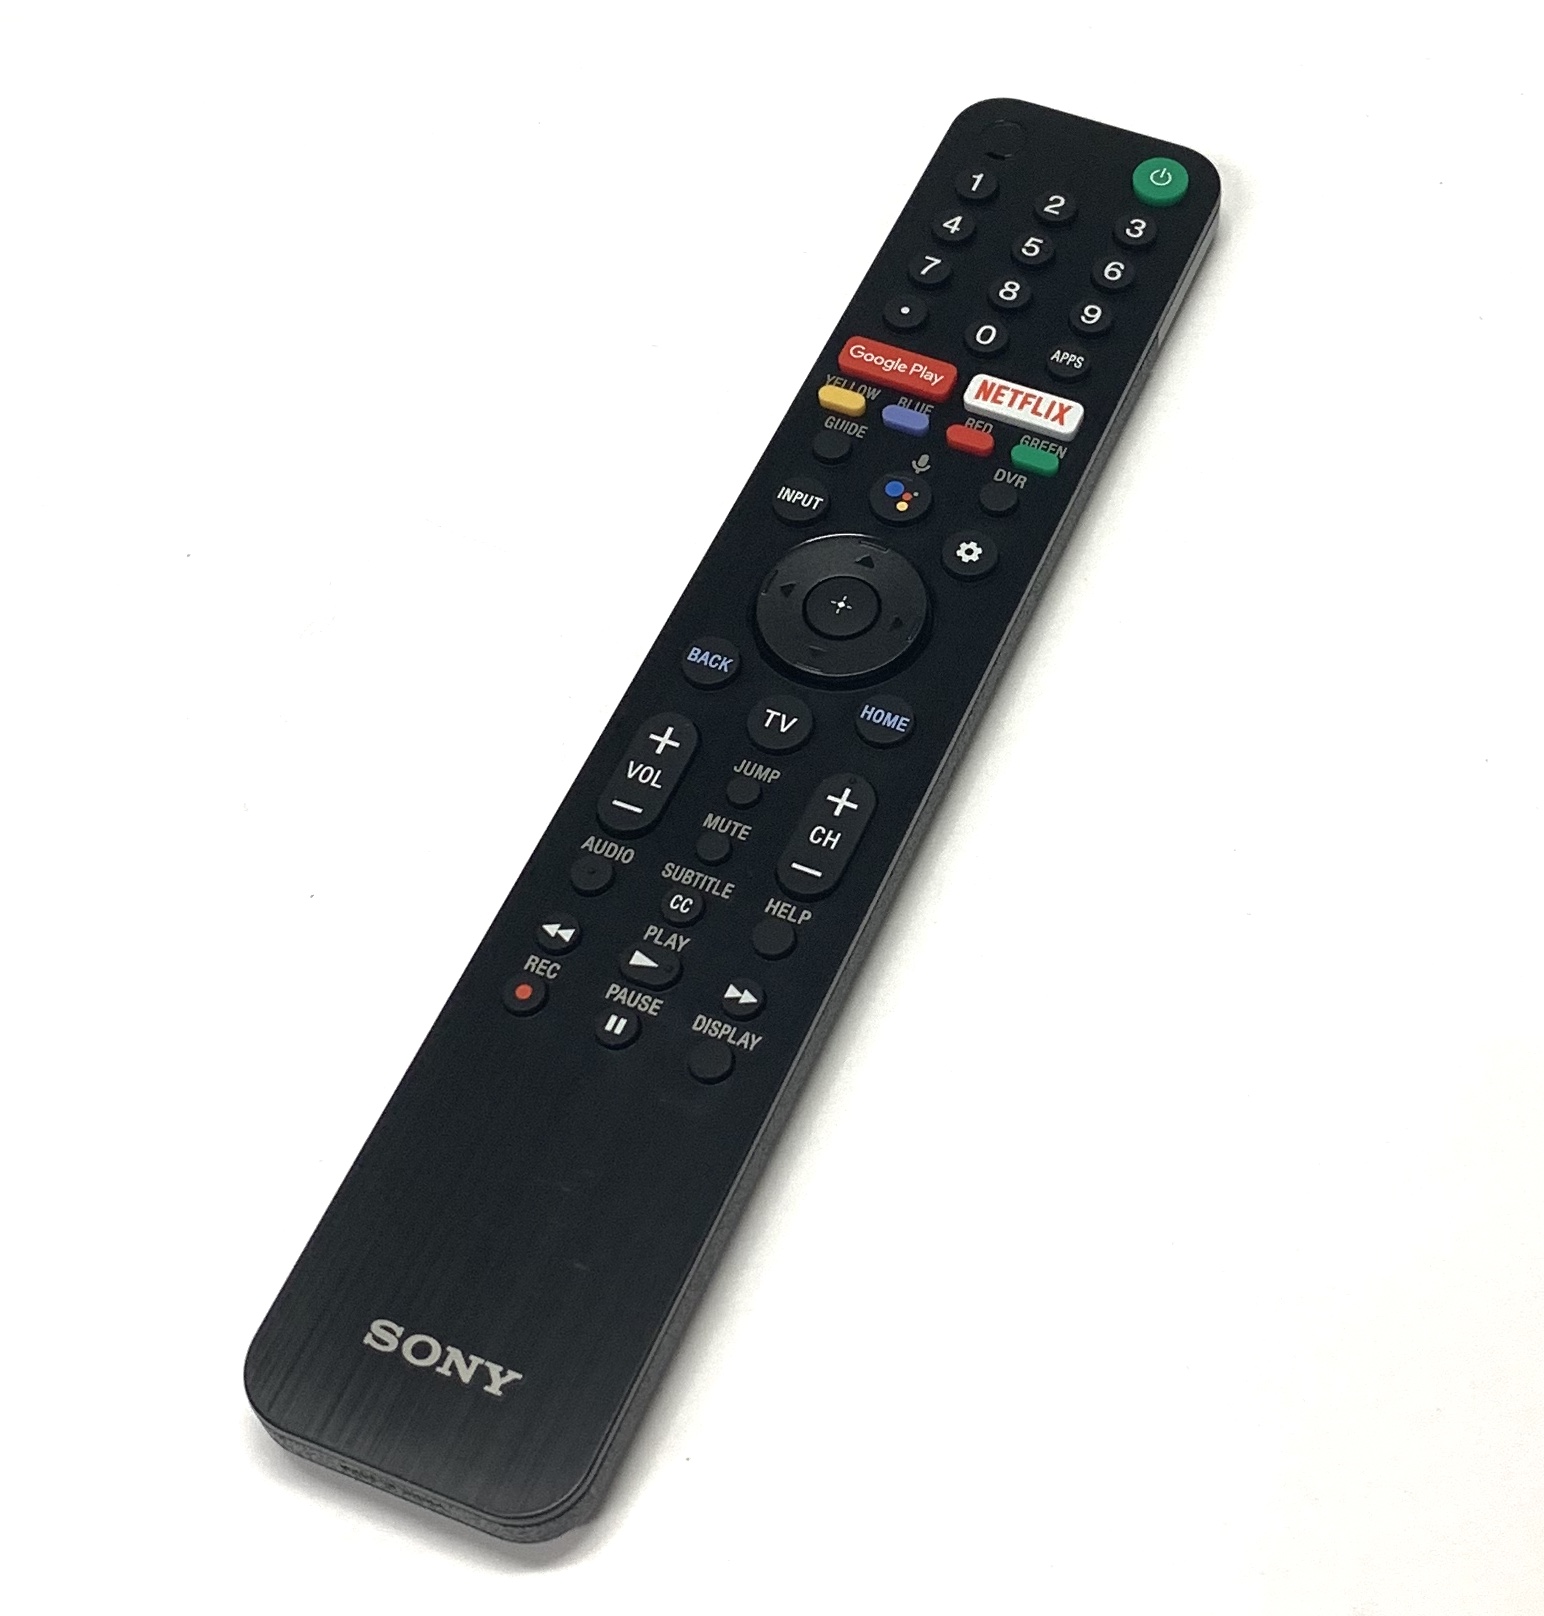 Sony OEM Sony Remote Control Specifically For XBR-65X900E, XBR65X900F, XBR-65X900F, XBR65X905E, XBR-65X905E